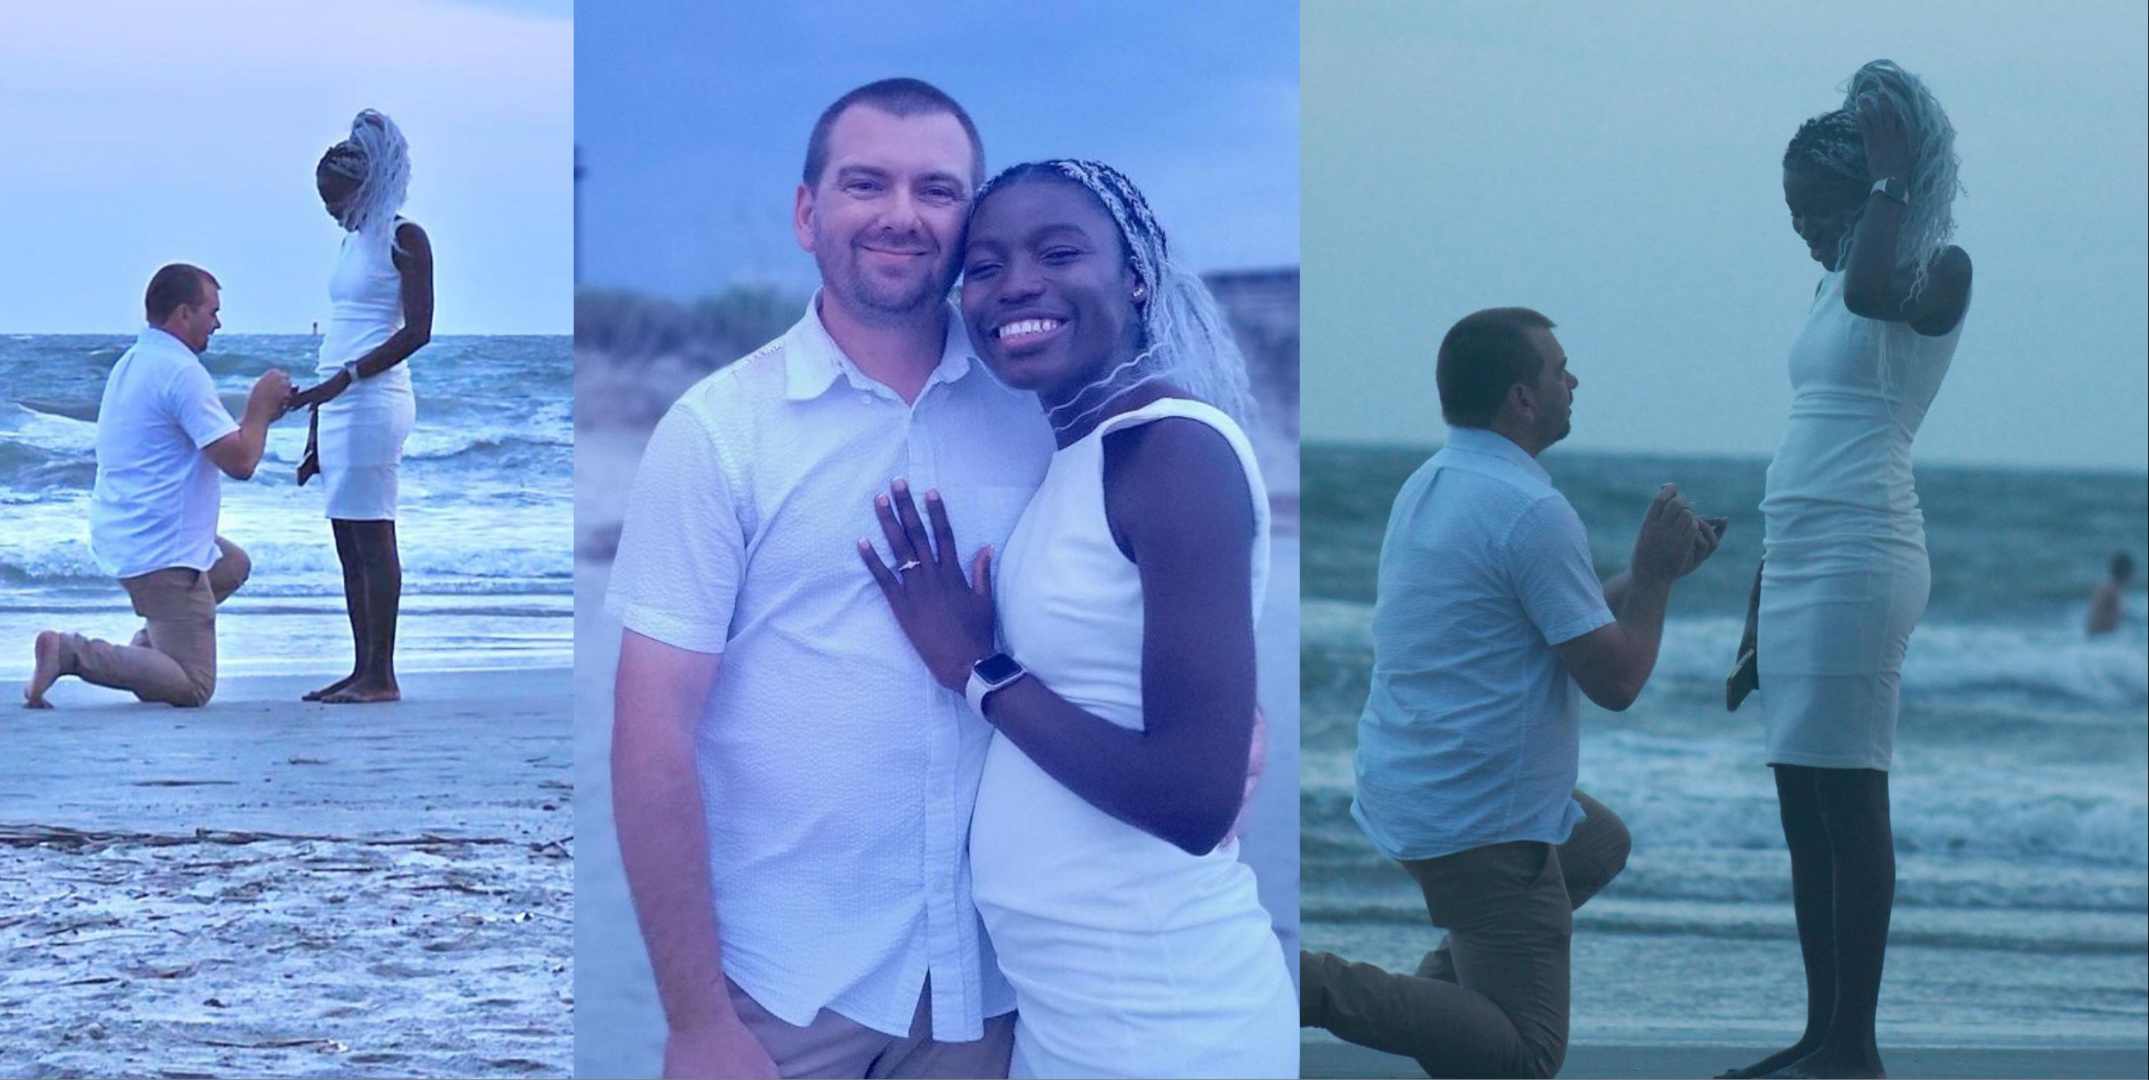 "Her story has changed" – Chibok girl who escaped Boko Haram abduction gets engaged to US lover (Photos)